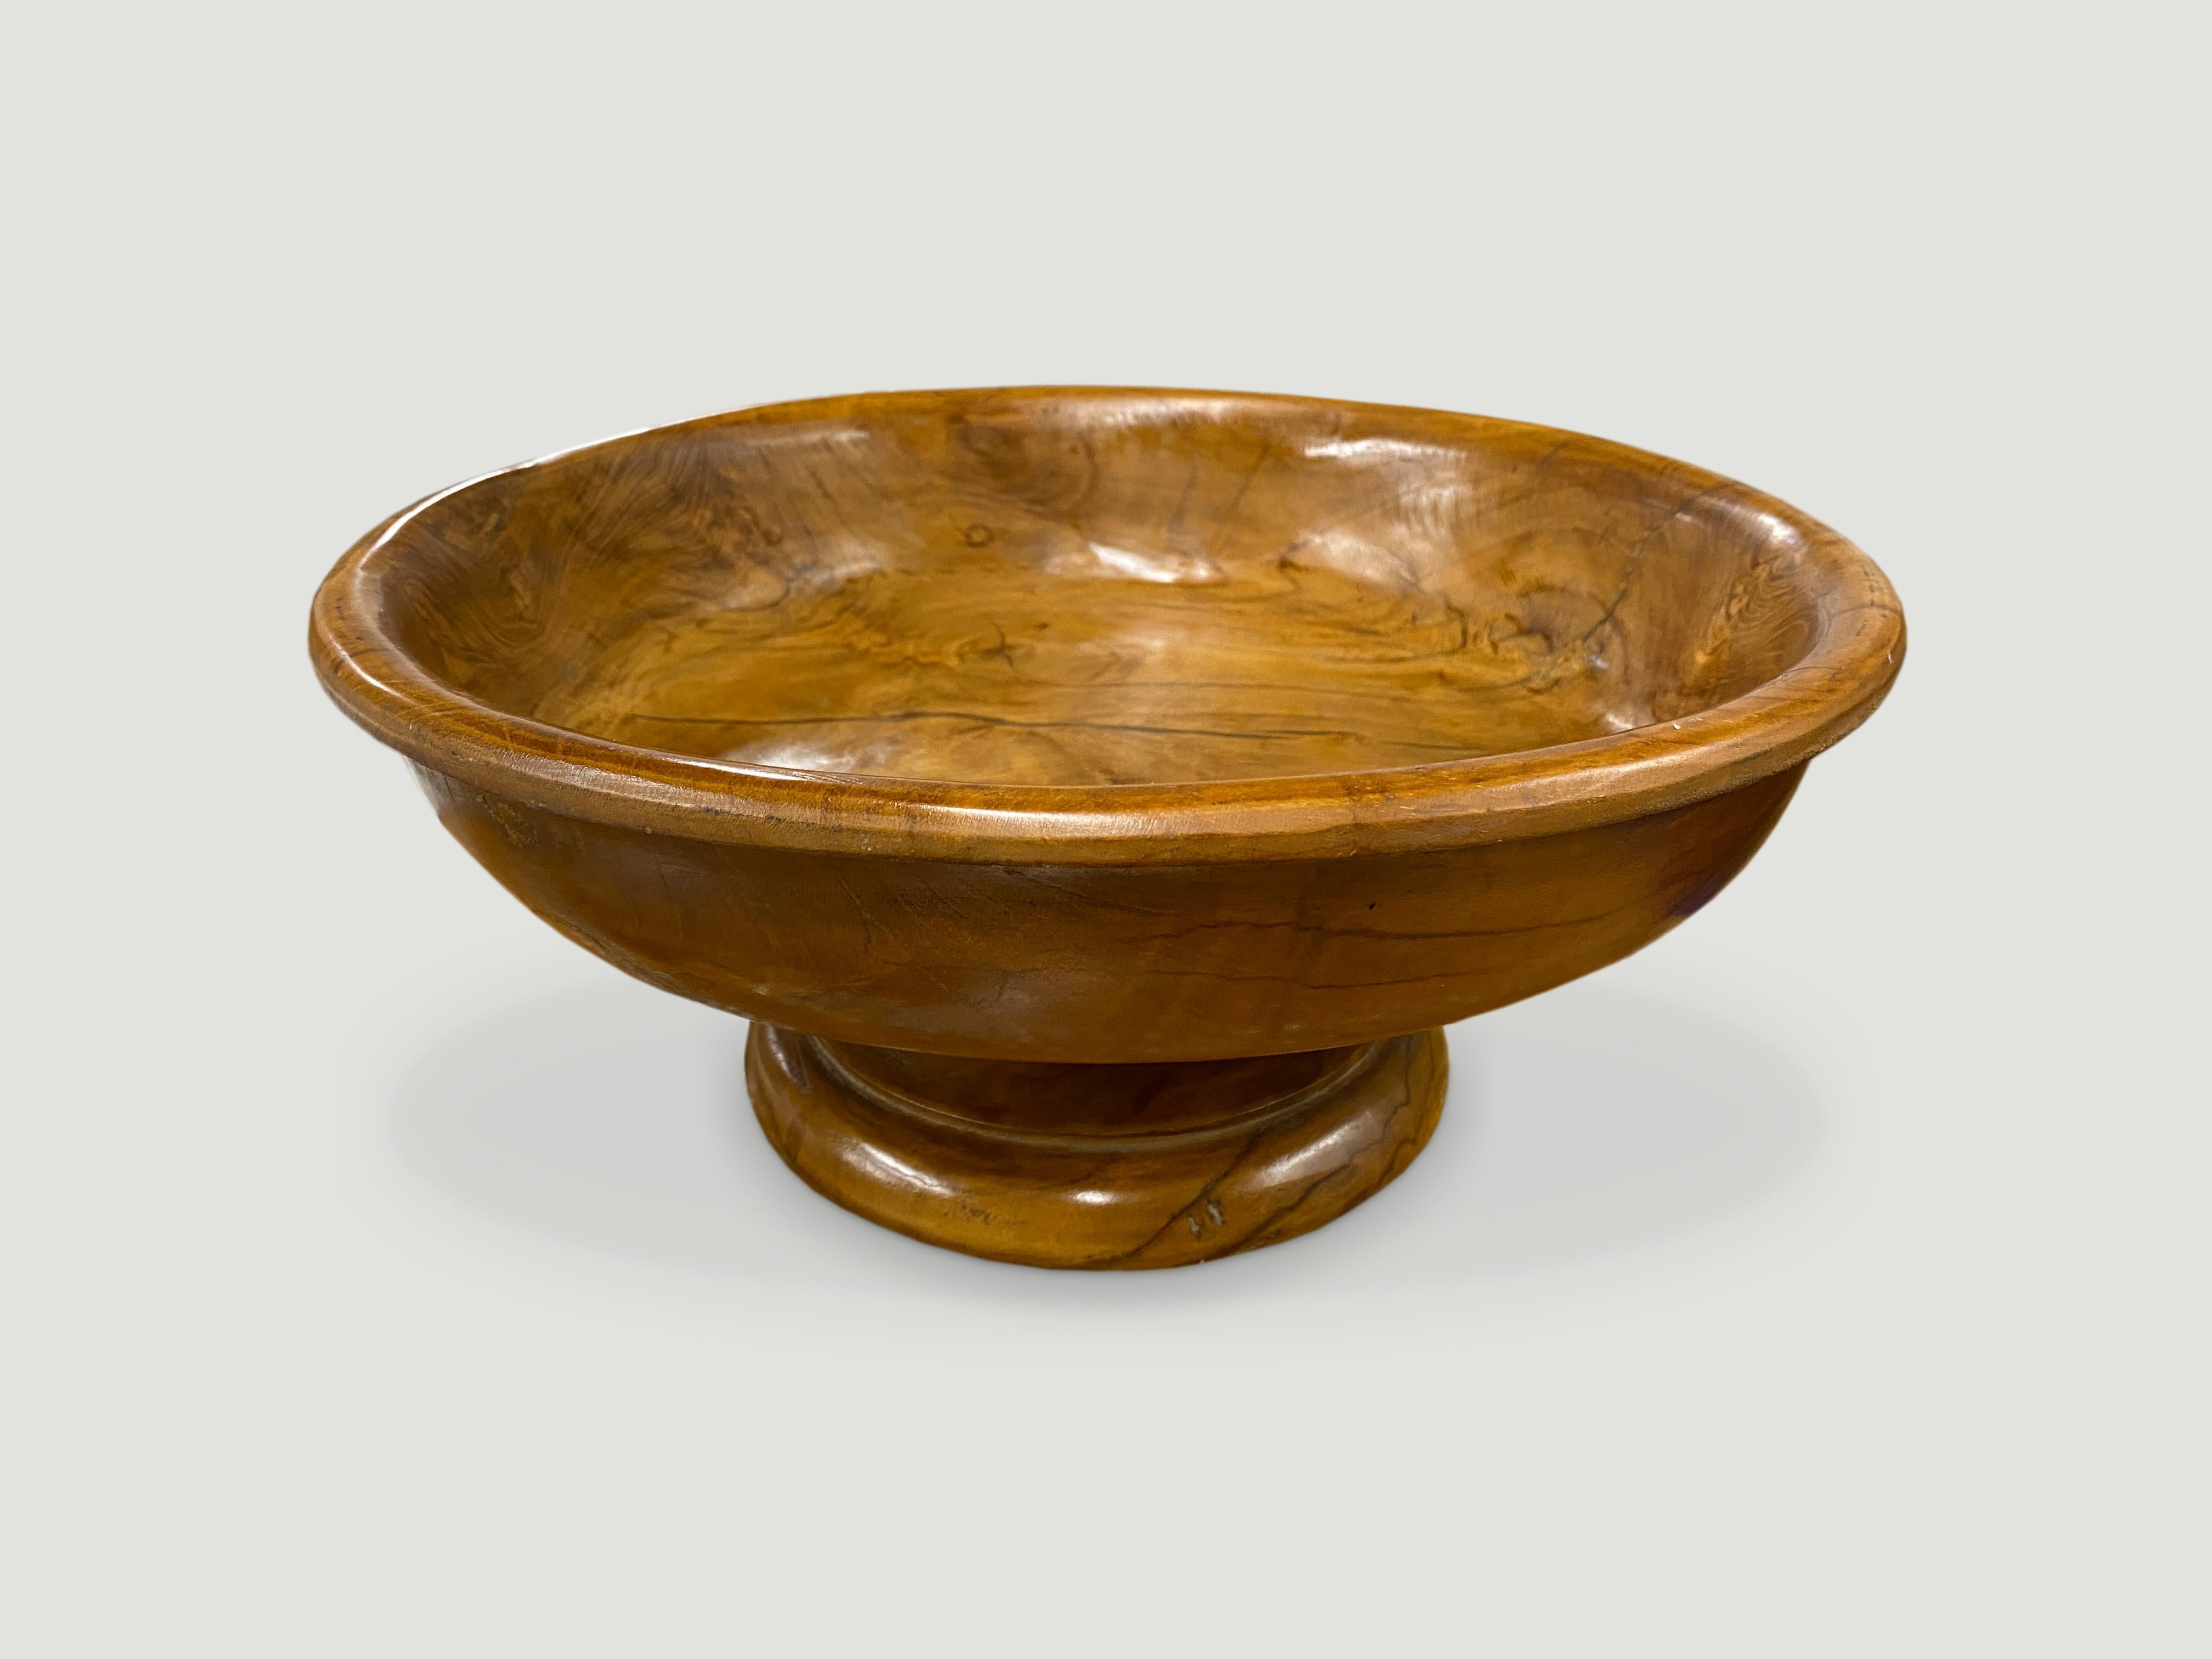 Natural teak hand carved offering tray that has a multitude of applications, from holding fruit, towels or soap in a bathroom. 

Andrianna Shamaris. The Leader In Modern Organic Design.